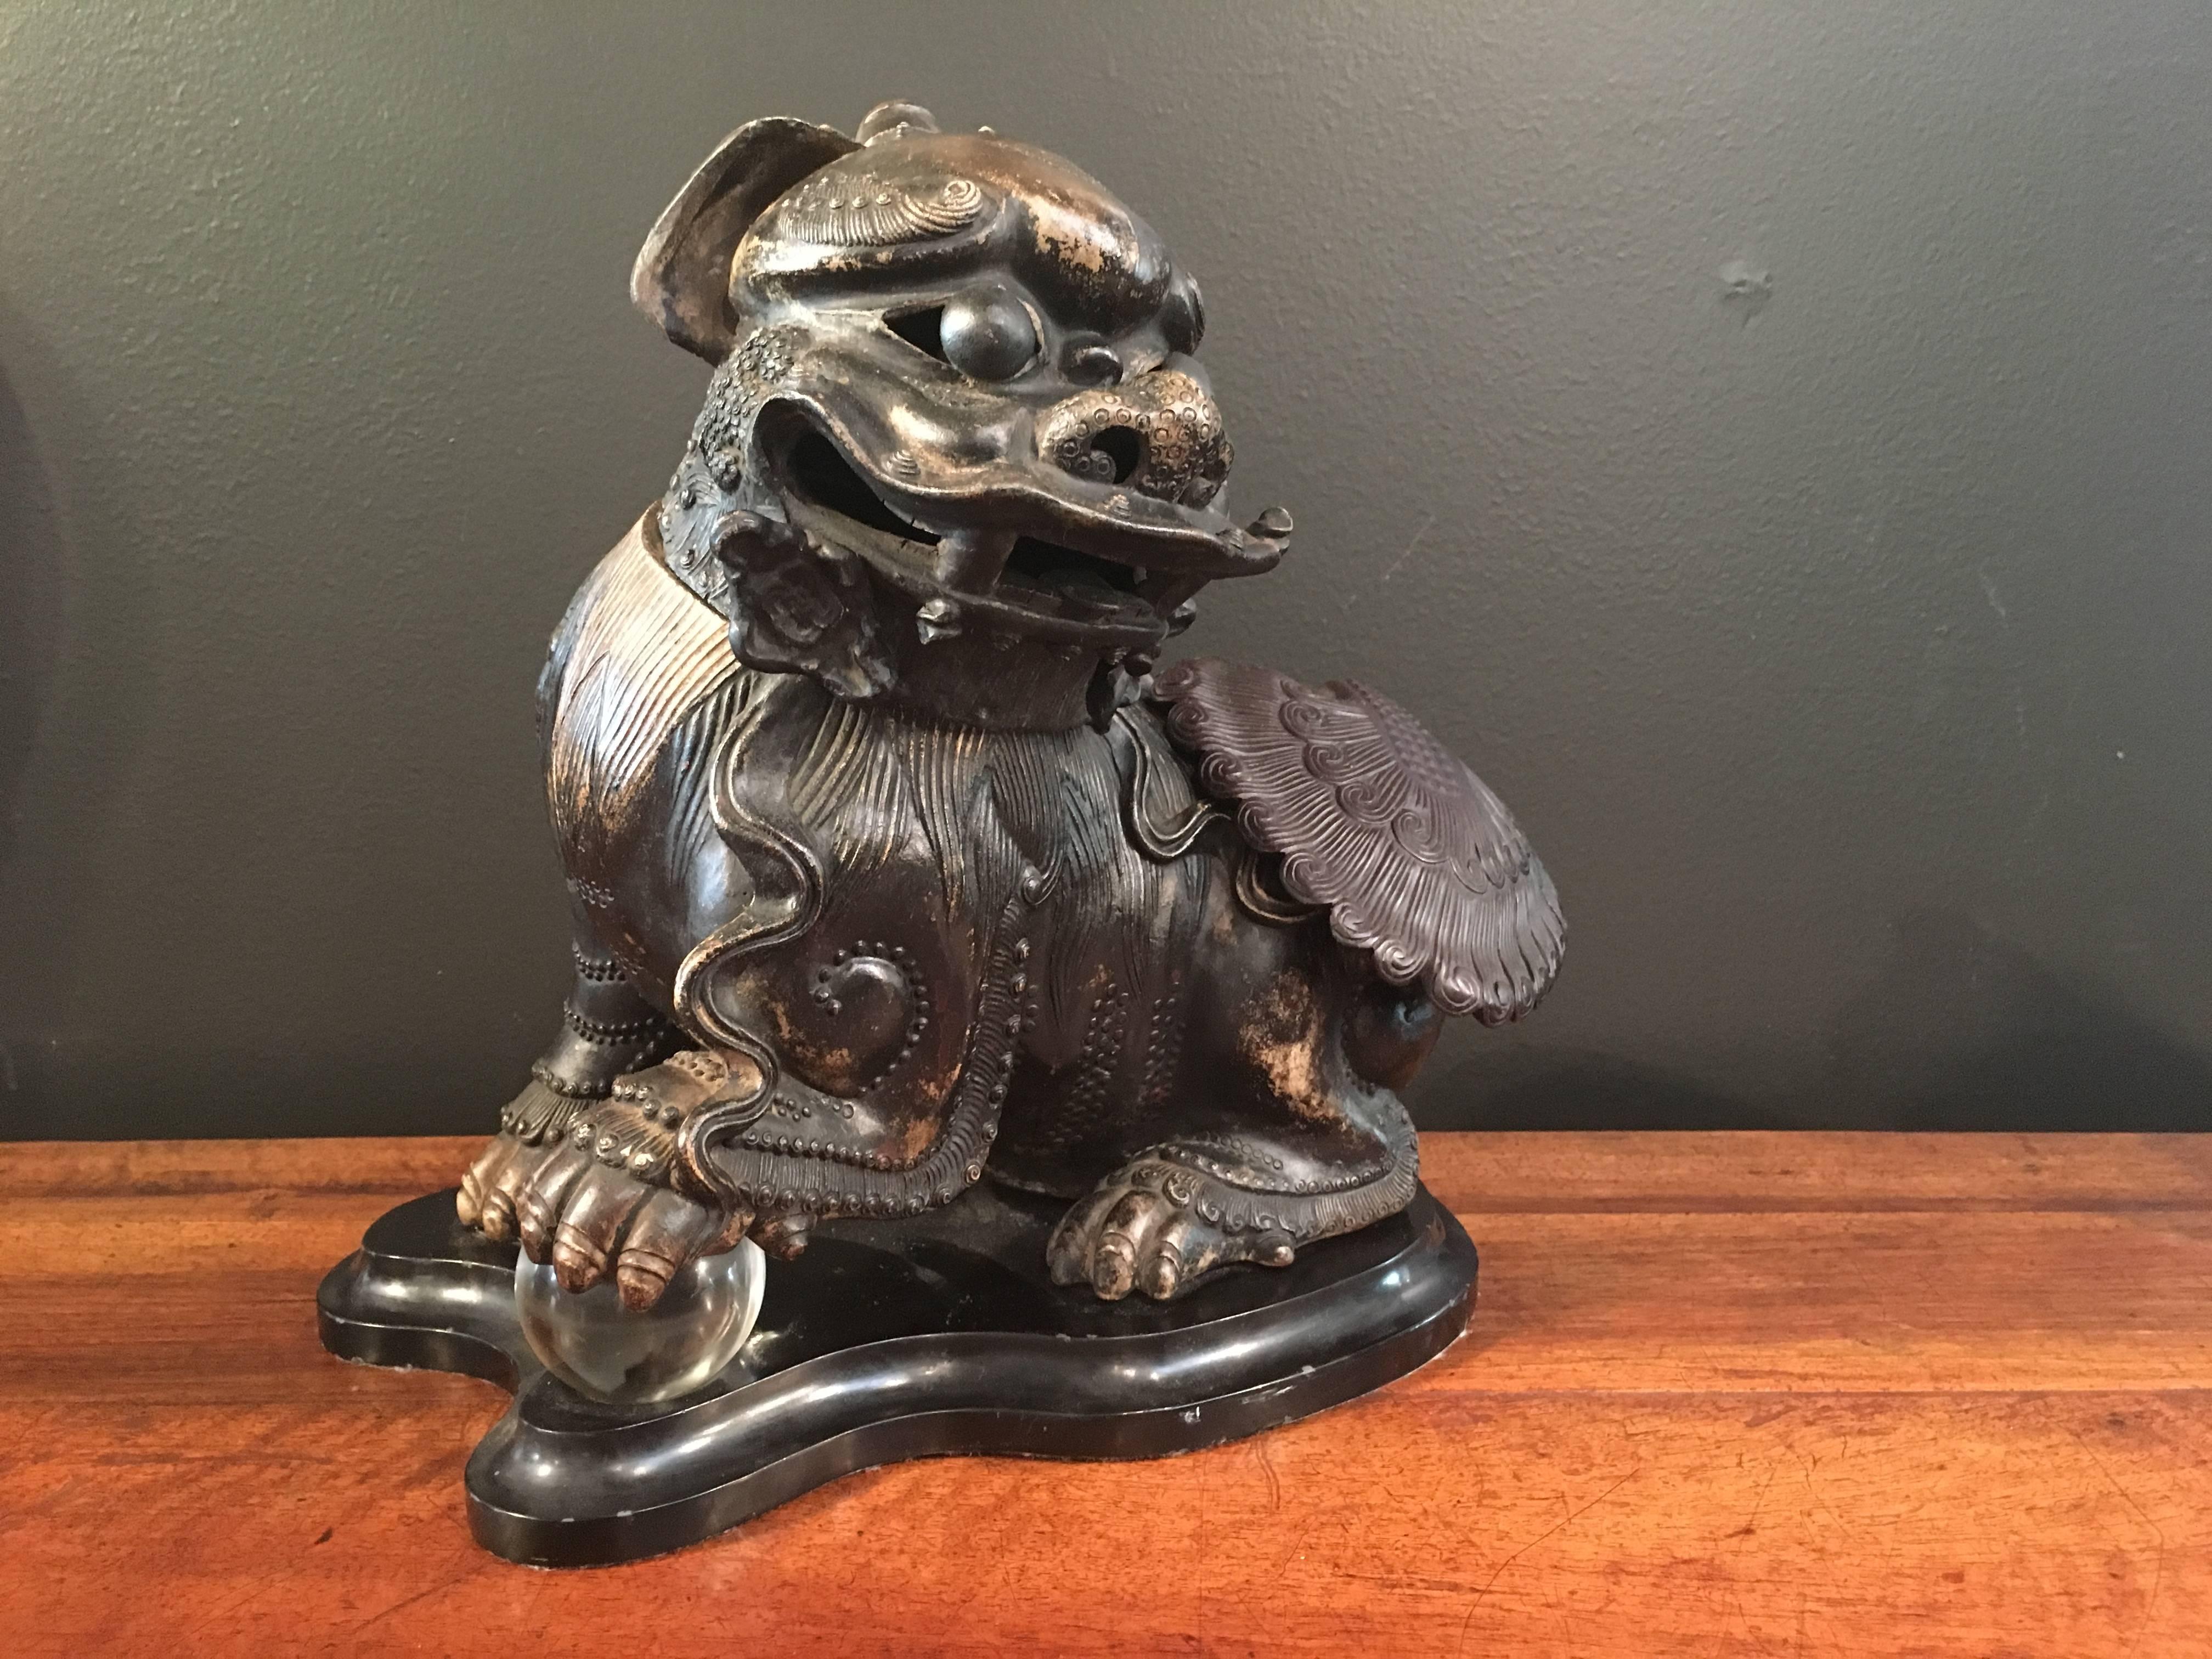 An unusual and whimsical censer modeled as a charming foo lion. The figure is well formed, with fine attention to detail. He sports a single small horn on the top of his head, framed by floppy ears. His bulging eyes, separately molded, and loose in